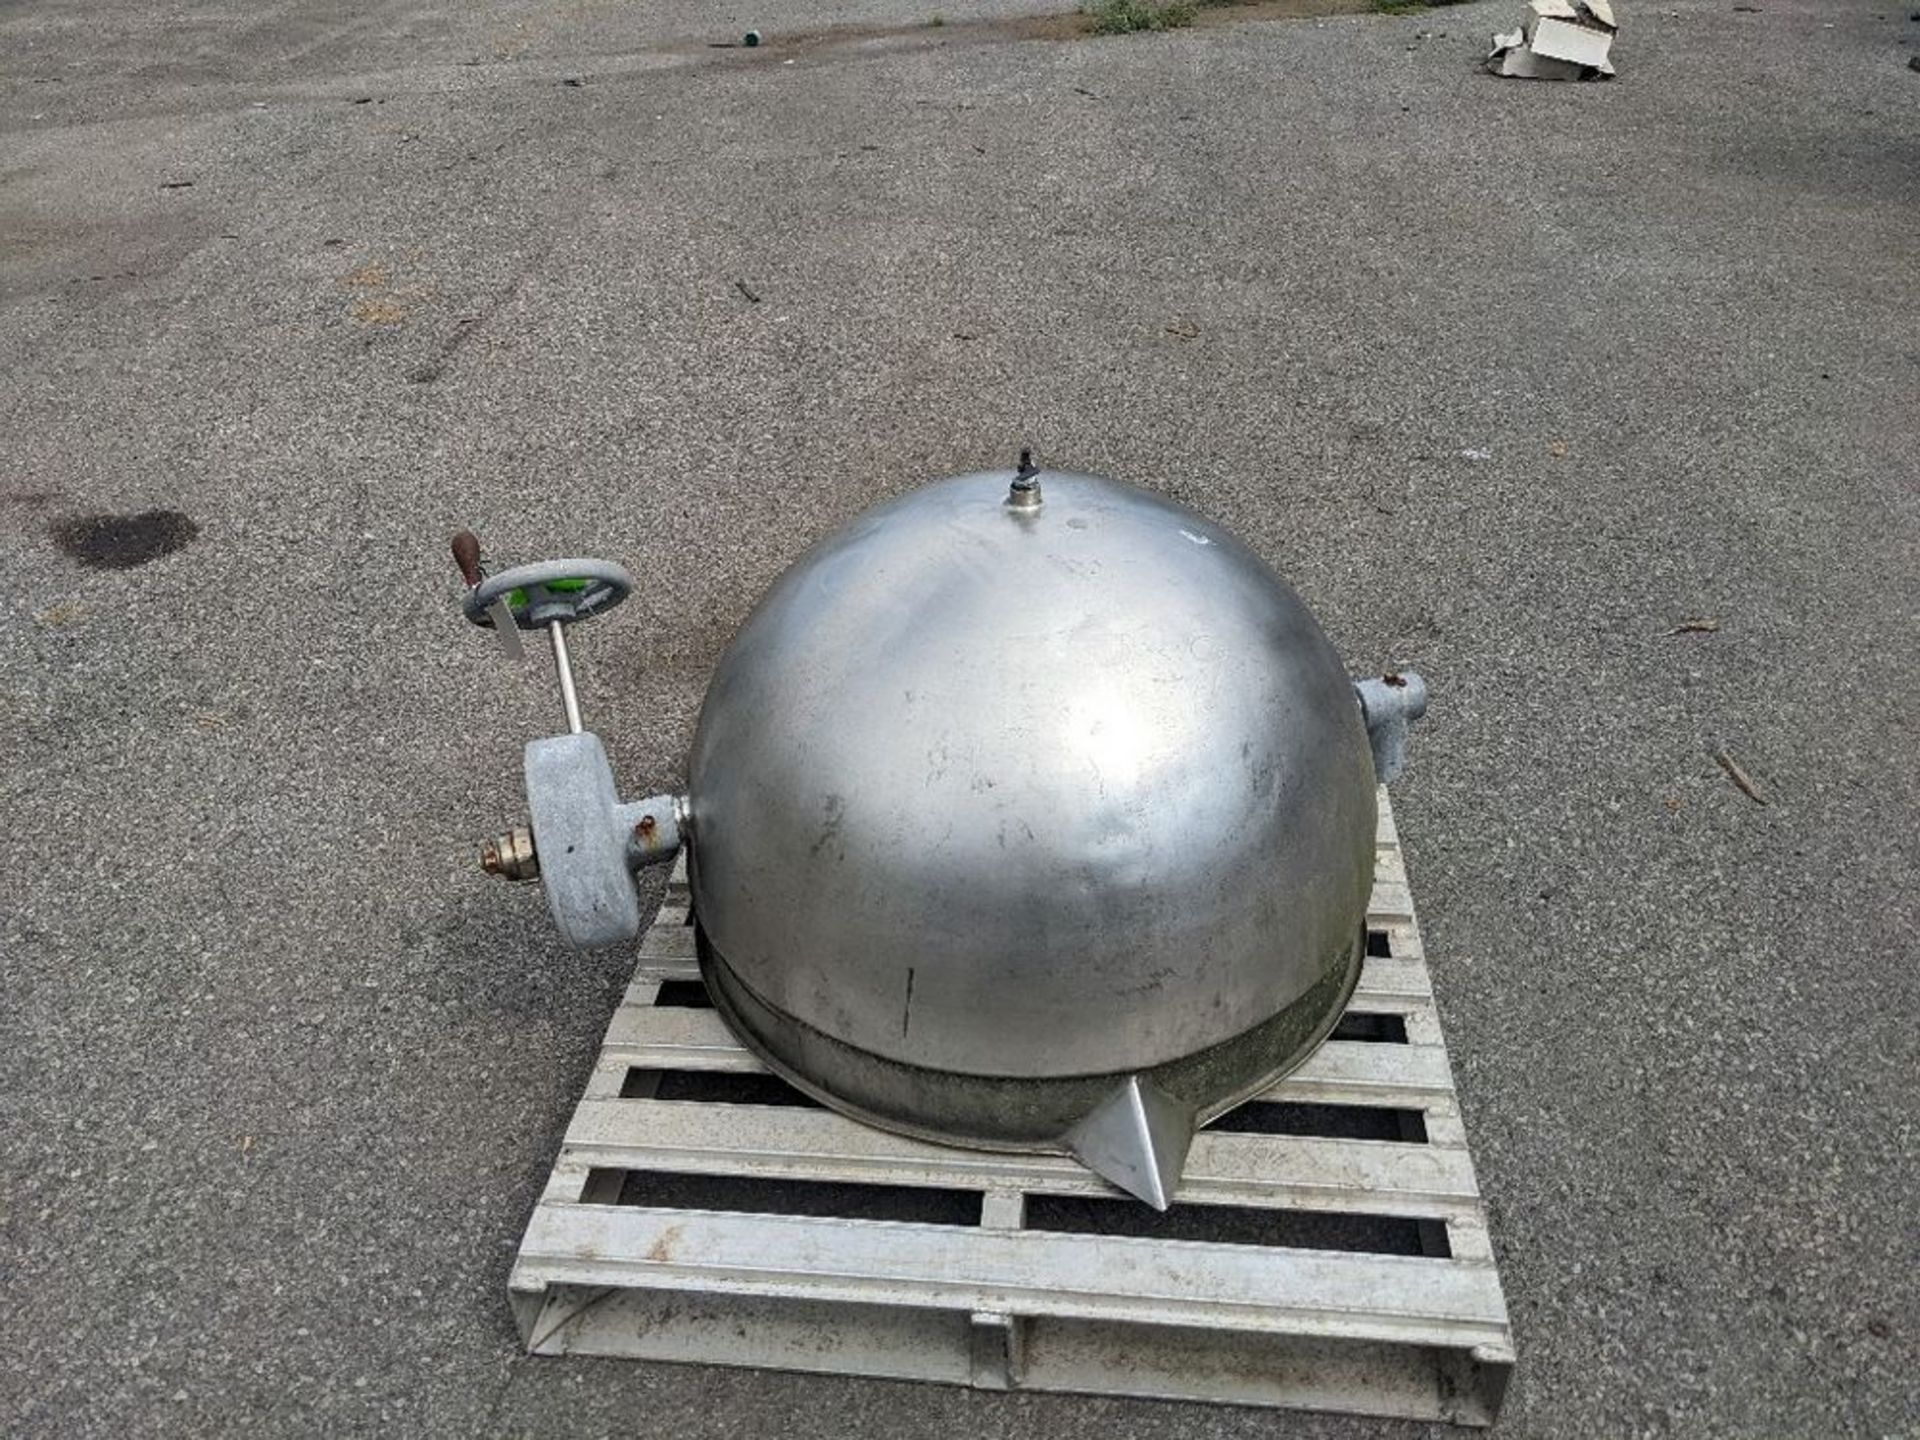 Qty (1) Hubbert 40 Gallon Jacketed Kettle - 40 gallon all stainless steel tilt kettle. - Jacketed to - Image 2 of 3